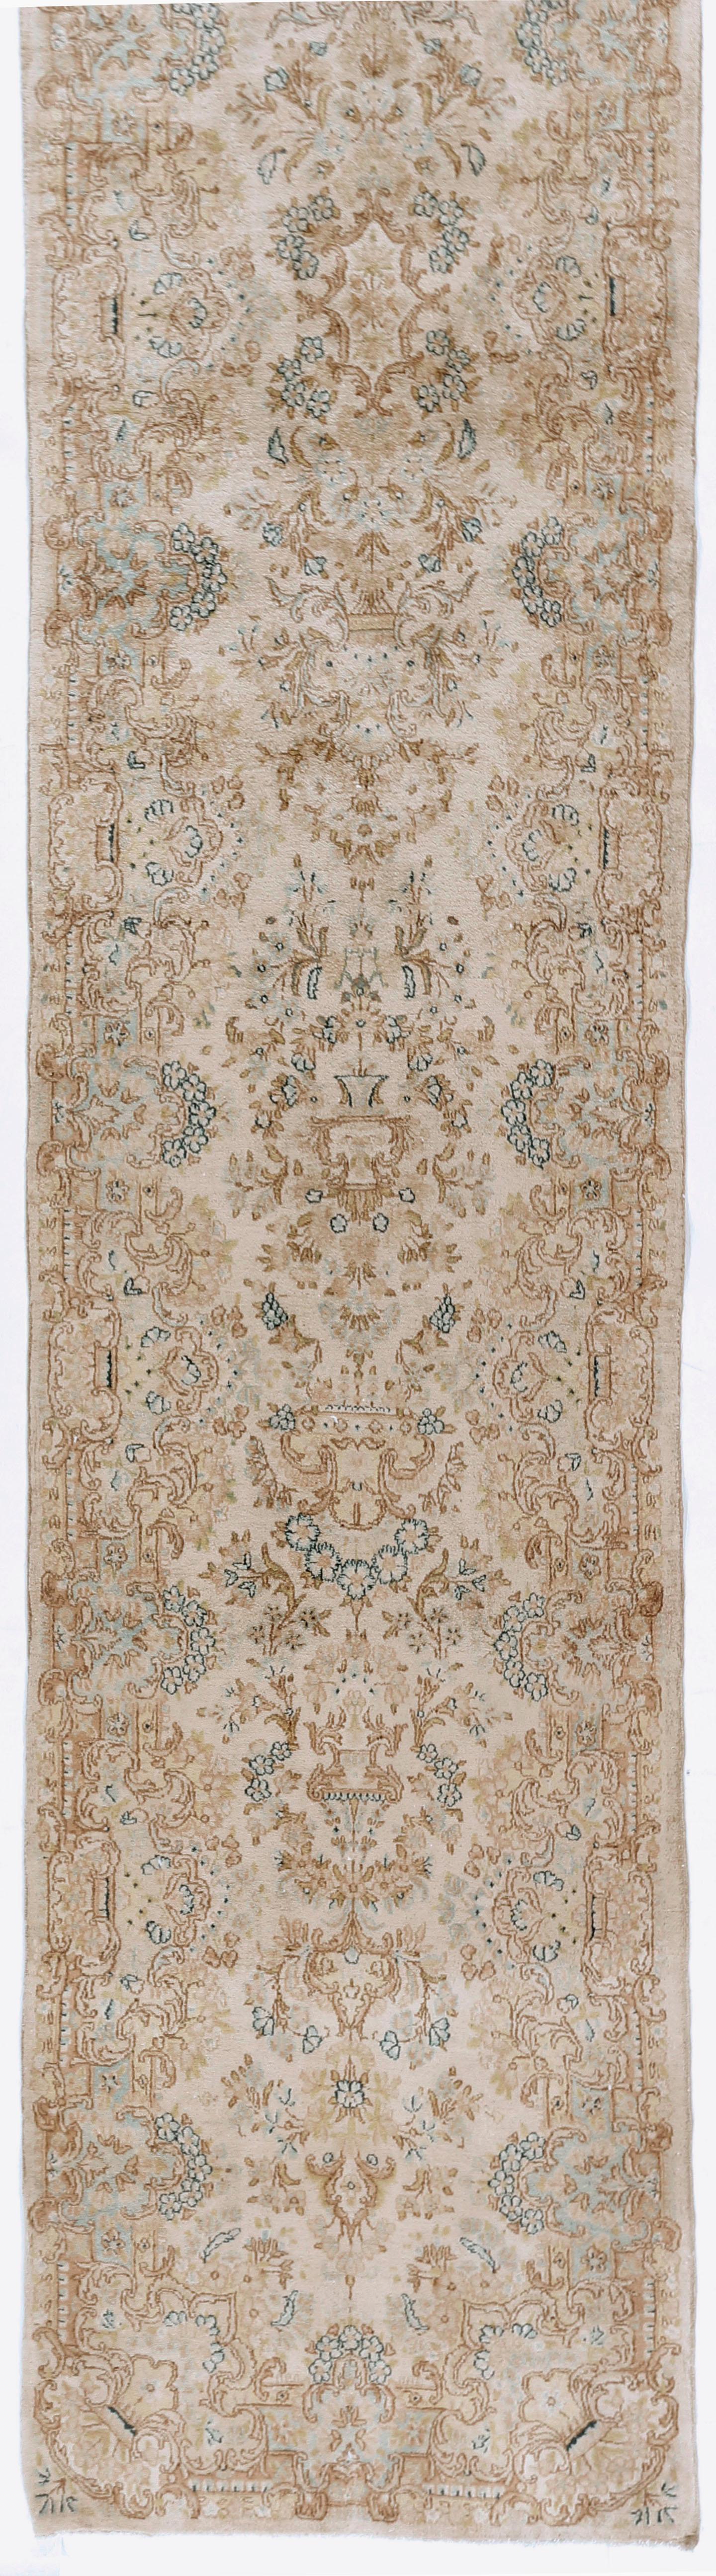 Vintage Persian Kerman runner 2'10 x 18'10. A soft and gentle design on an ivory field which blends in with the border to create this handwoven Kerman rug from Persia.